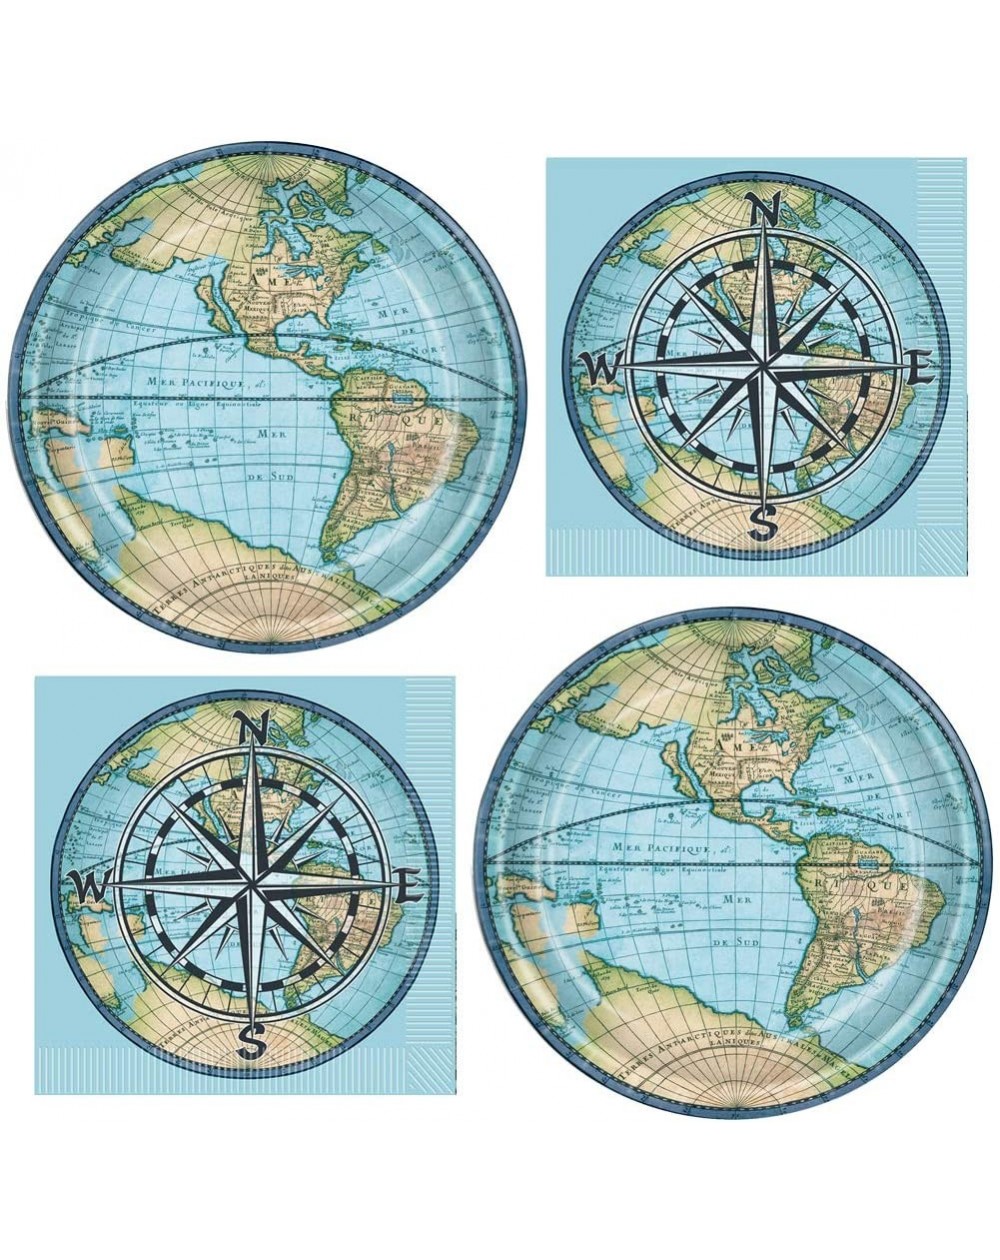 Party Packs Bon Voyage Travel Compass Theme Party Supplies Paper Plates and Napkins for Birthdays Retirement Cruise Map Explo...